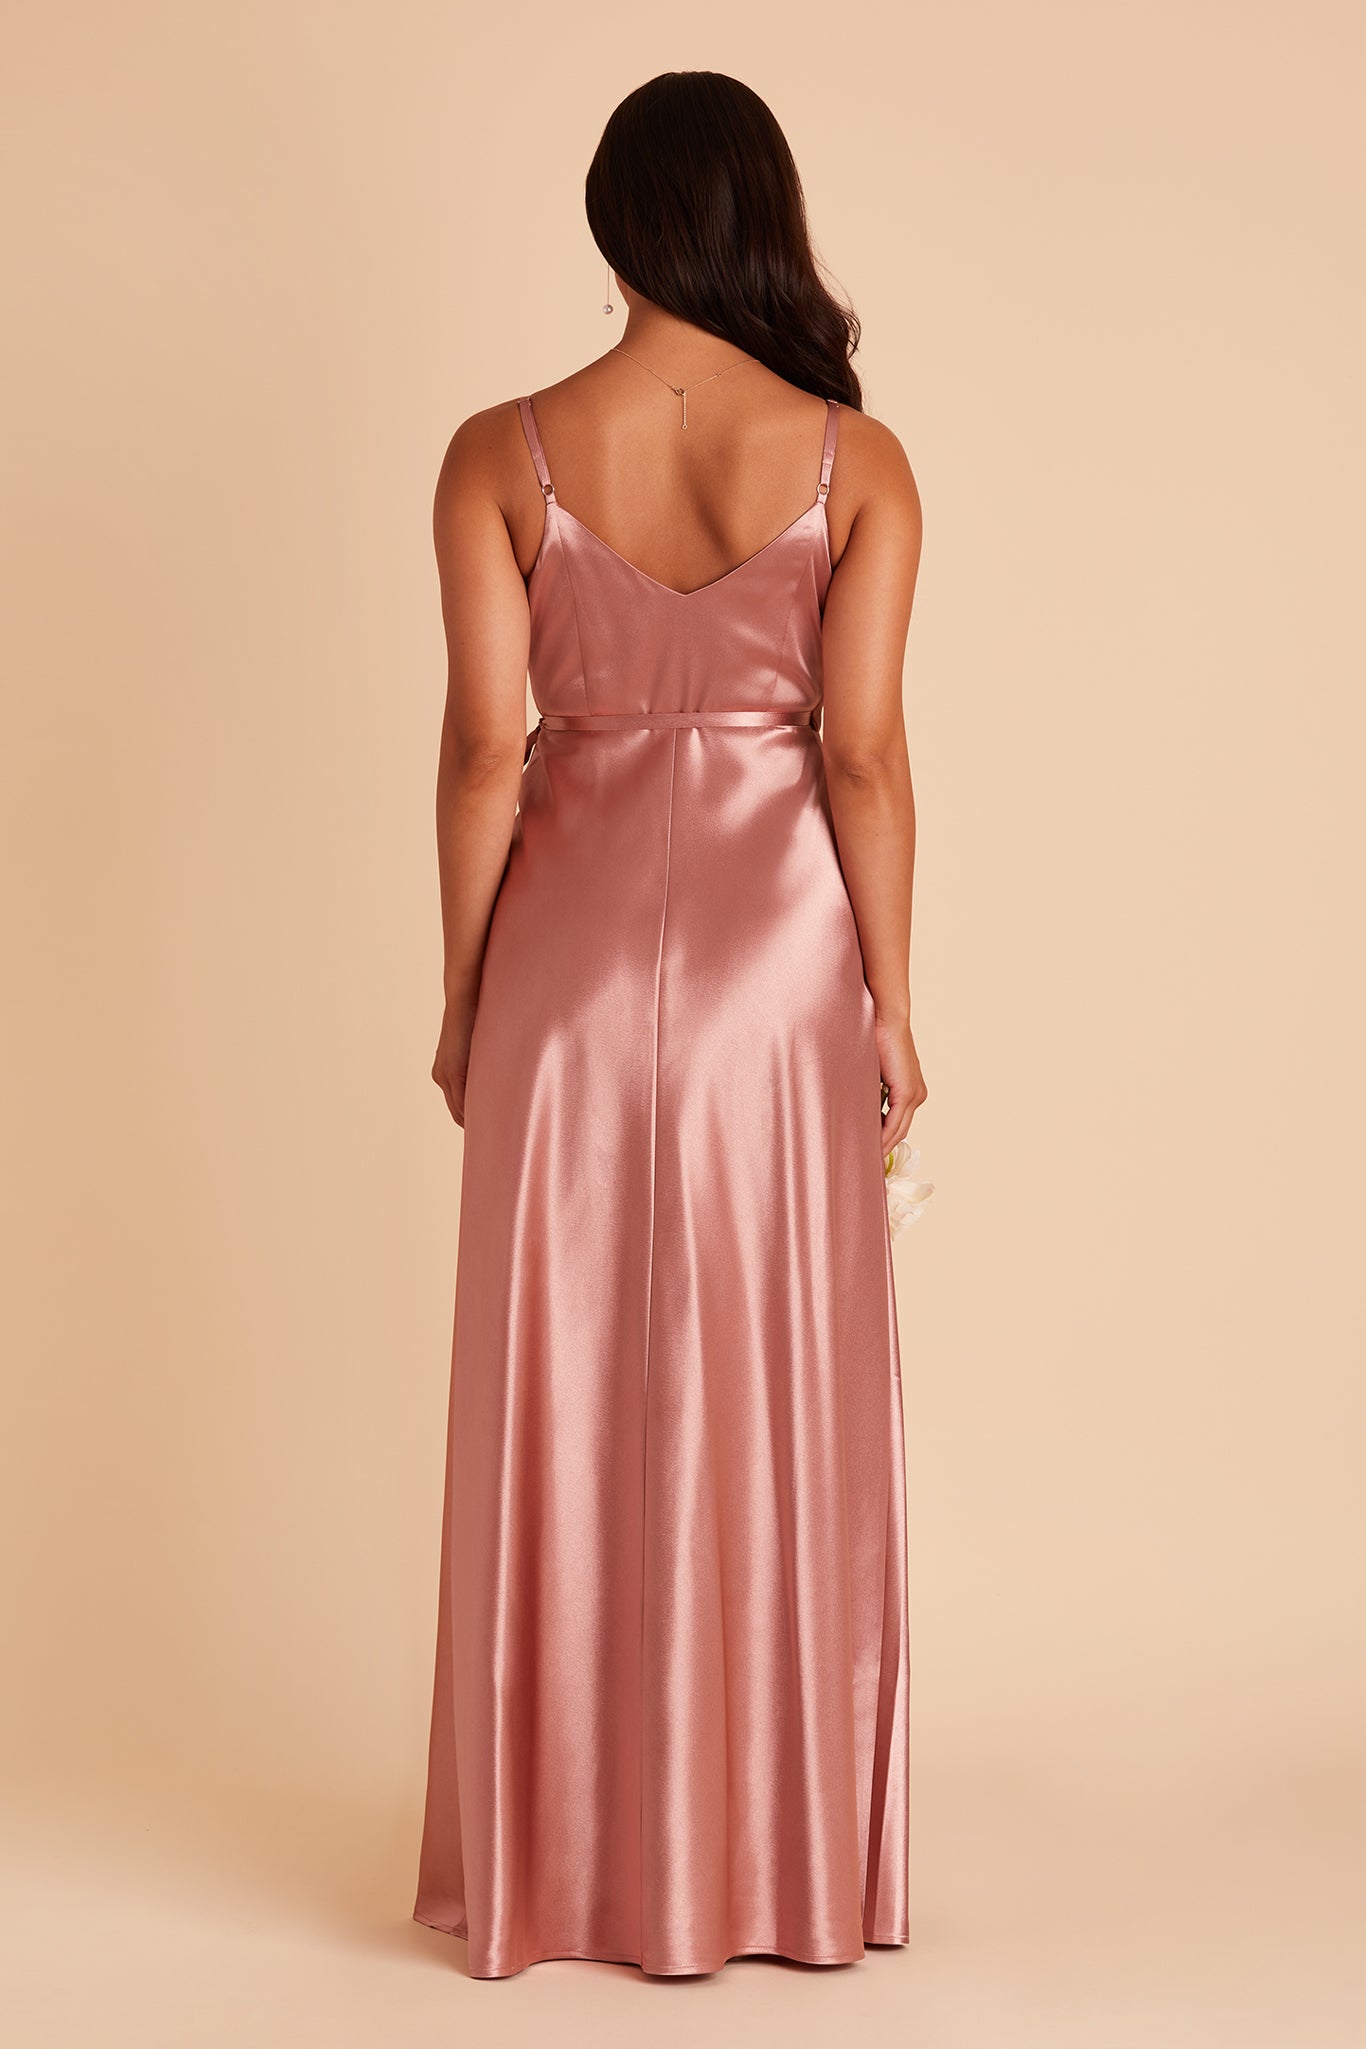 Cindy bridesmaid dress with slit in desert rose satin by Birdy Grey, back view